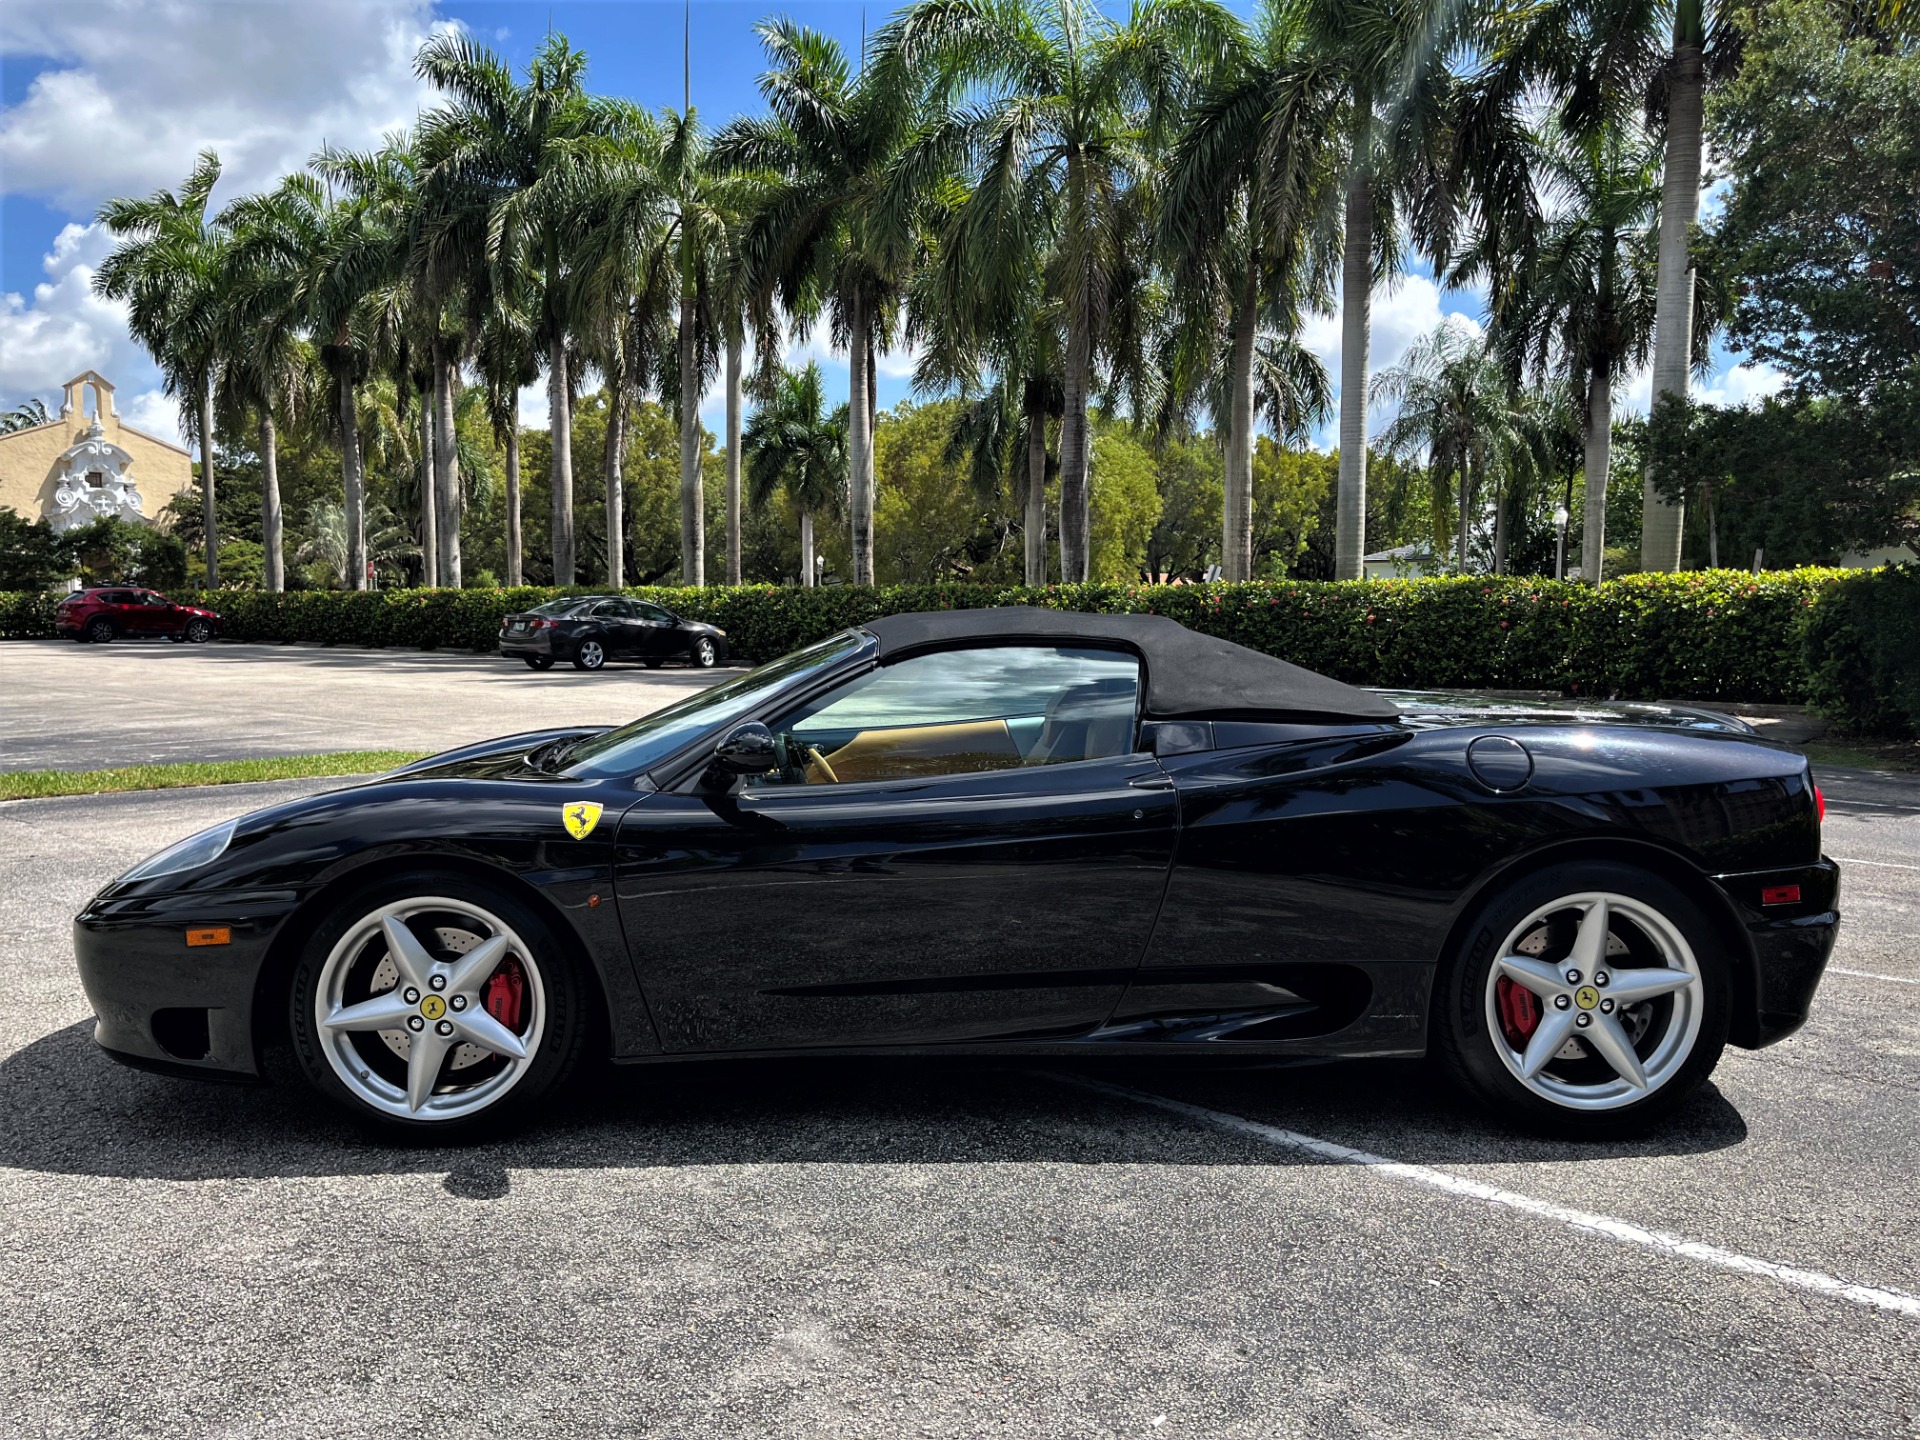 Used 2003 Ferrari 360 Spider for sale $74,850 at The Gables Sports Cars in Miami FL 33146 3